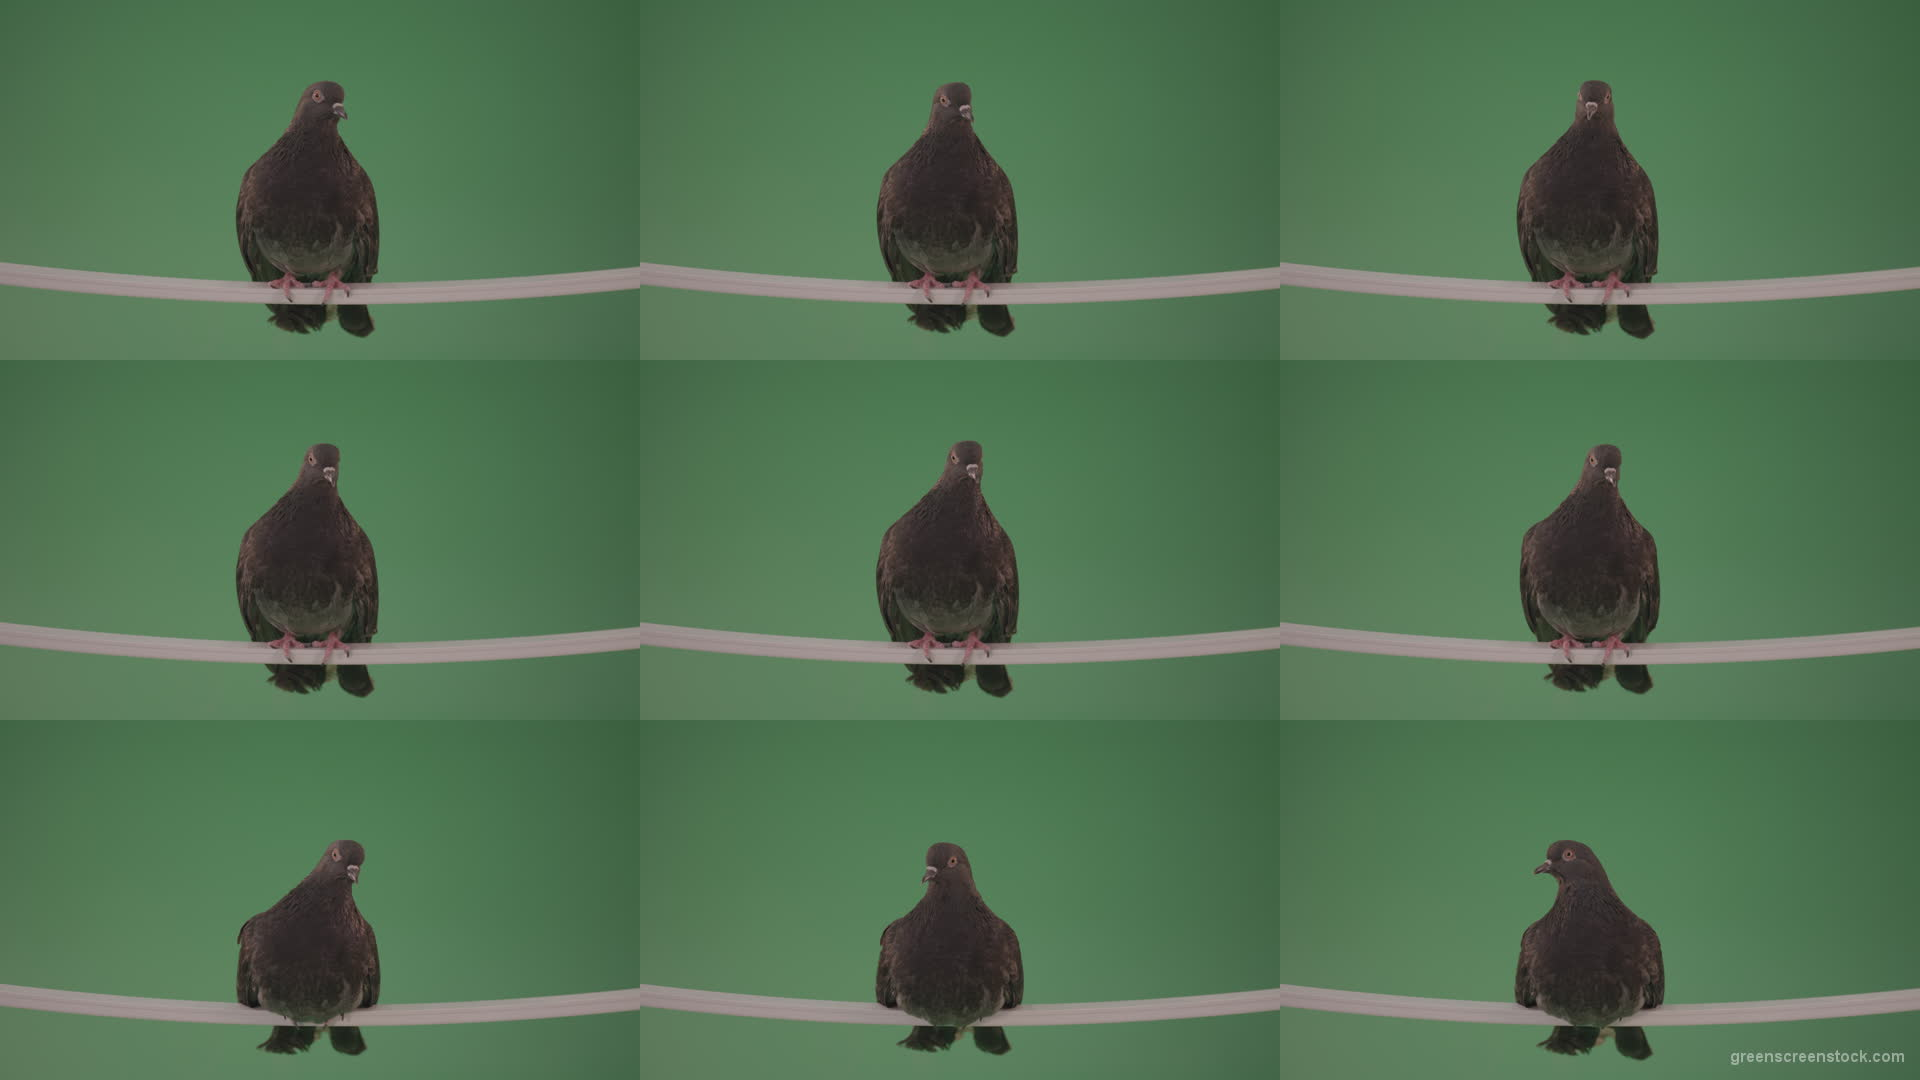 Gray-wild-bird-doves-sitting-on-a-branch-in-the-city-isolated-in-green-screen-studio Green Screen Stock